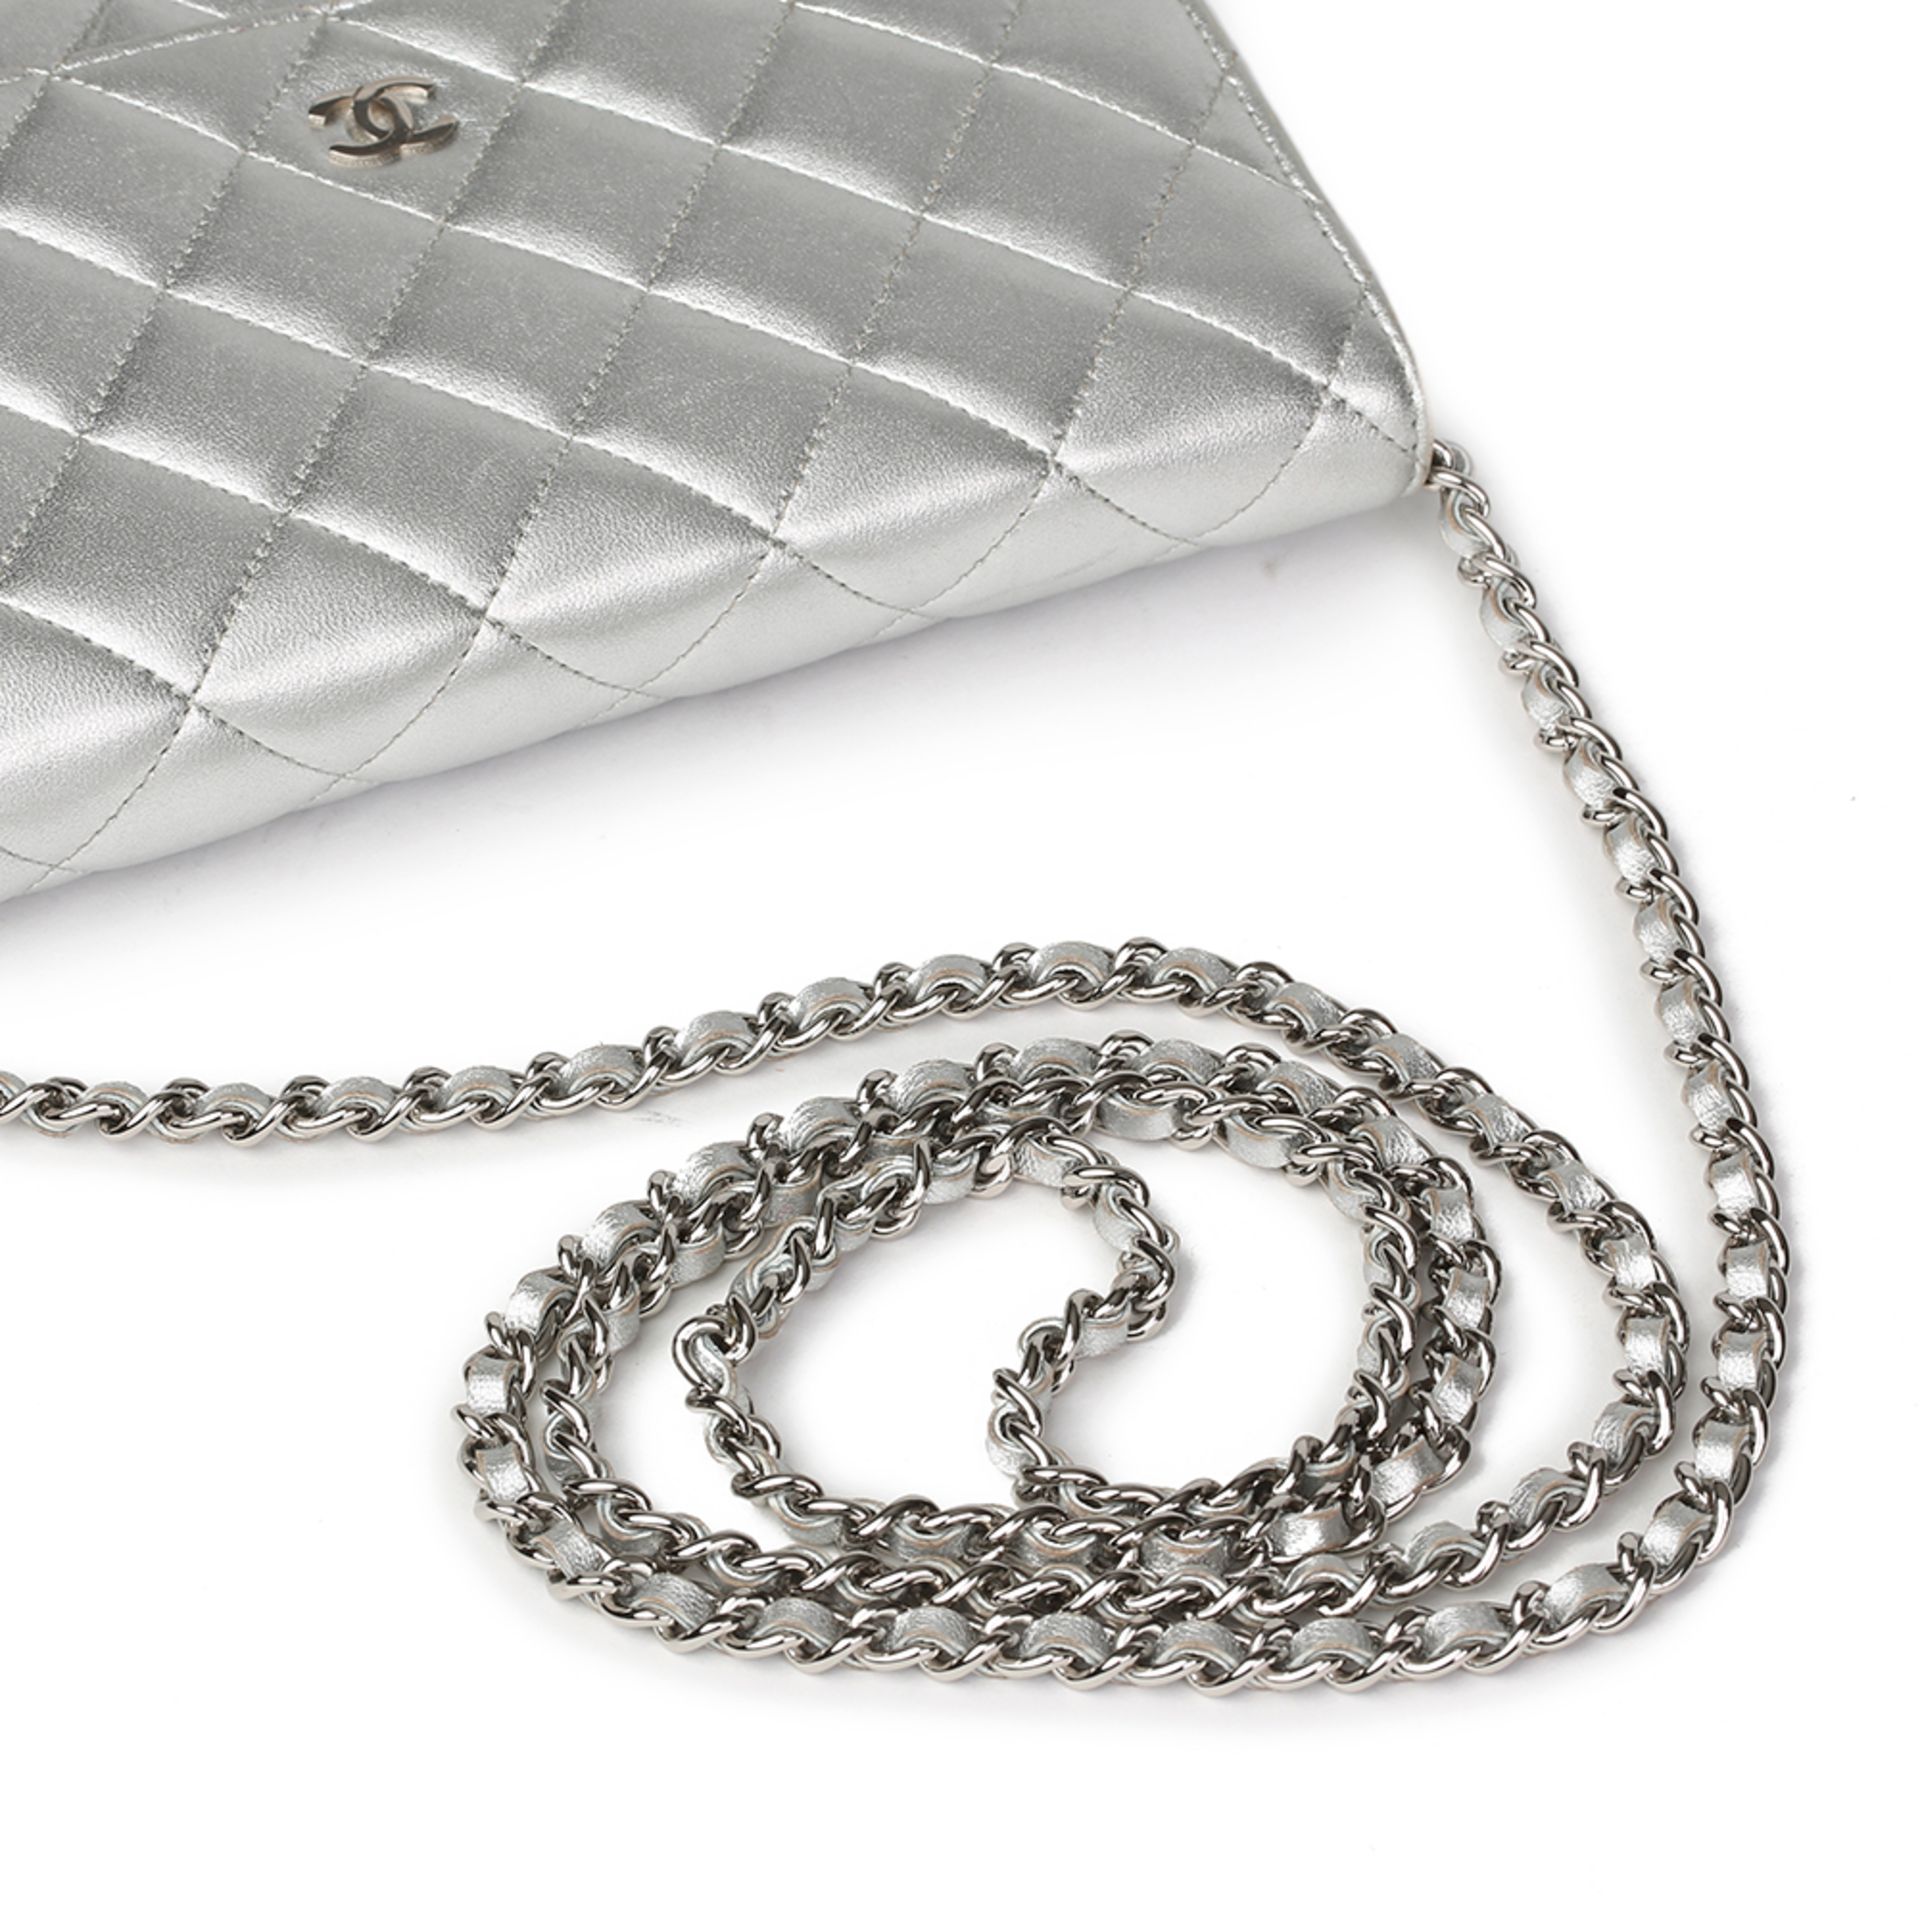 Chanel Silver Quilted Metallic Lambskin Wallet-On-Chain WOC - Image 6 of 11